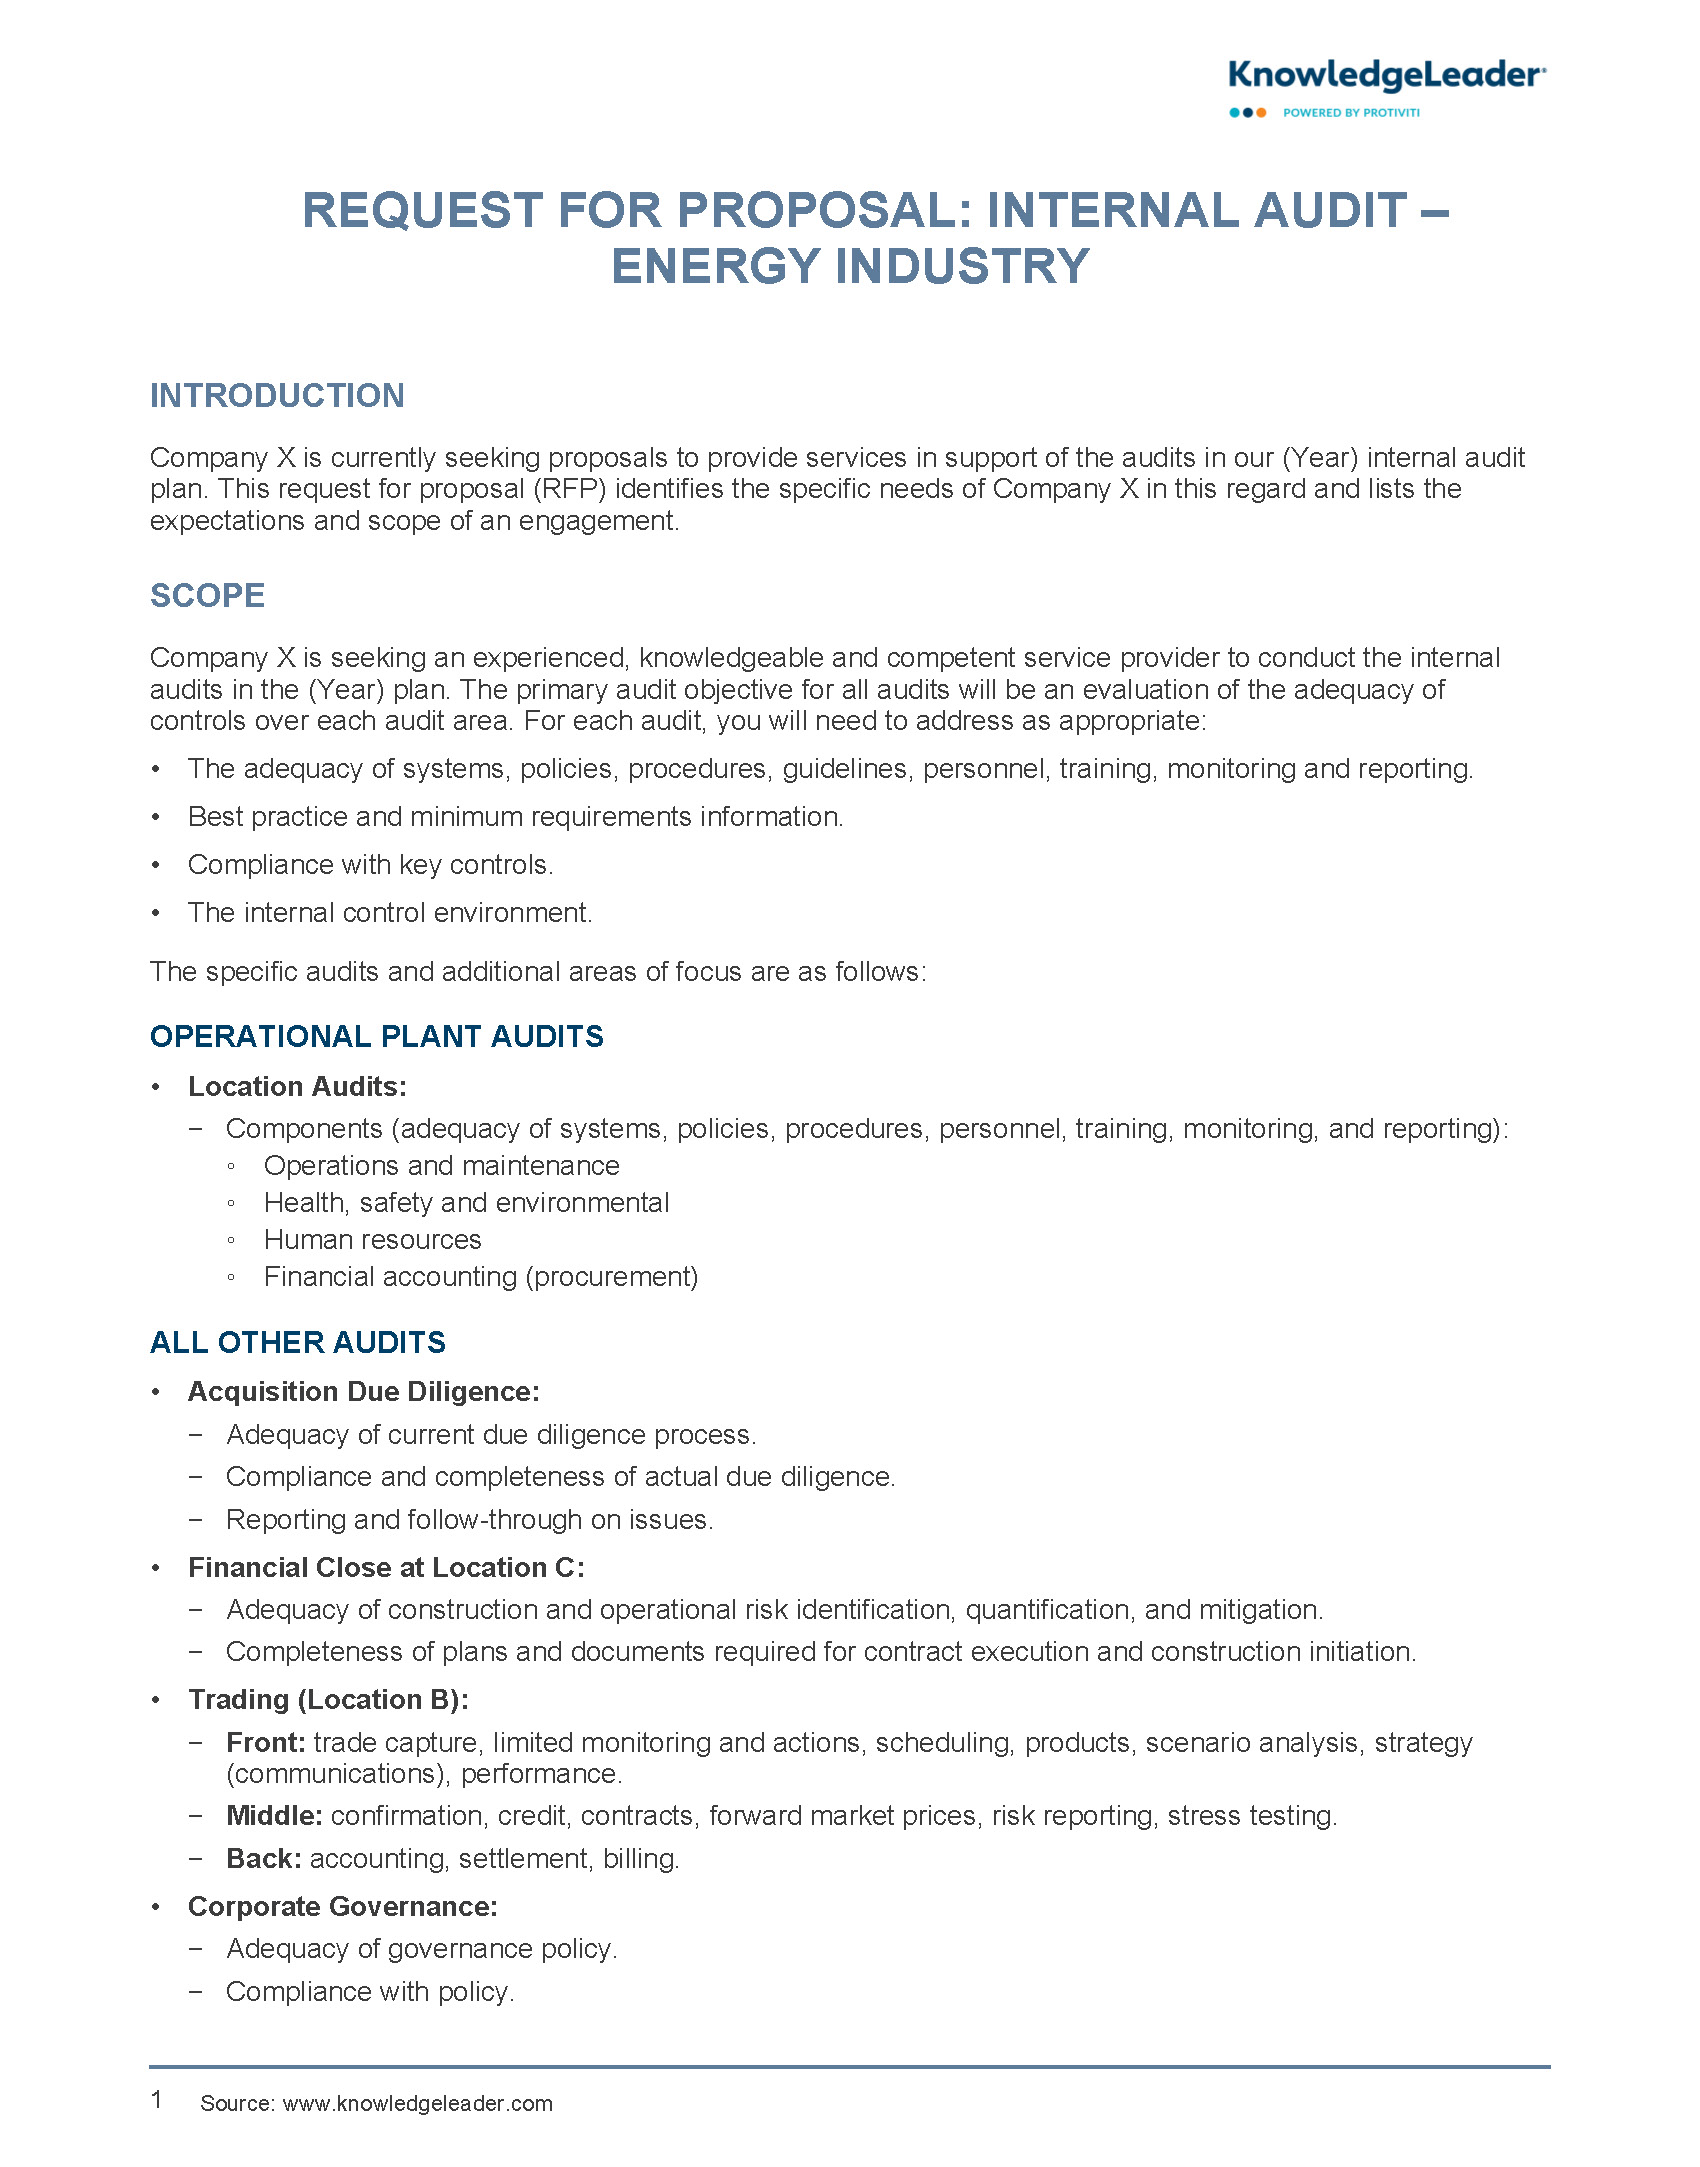 Request For Proposal - Internal Audit – Energy Industry